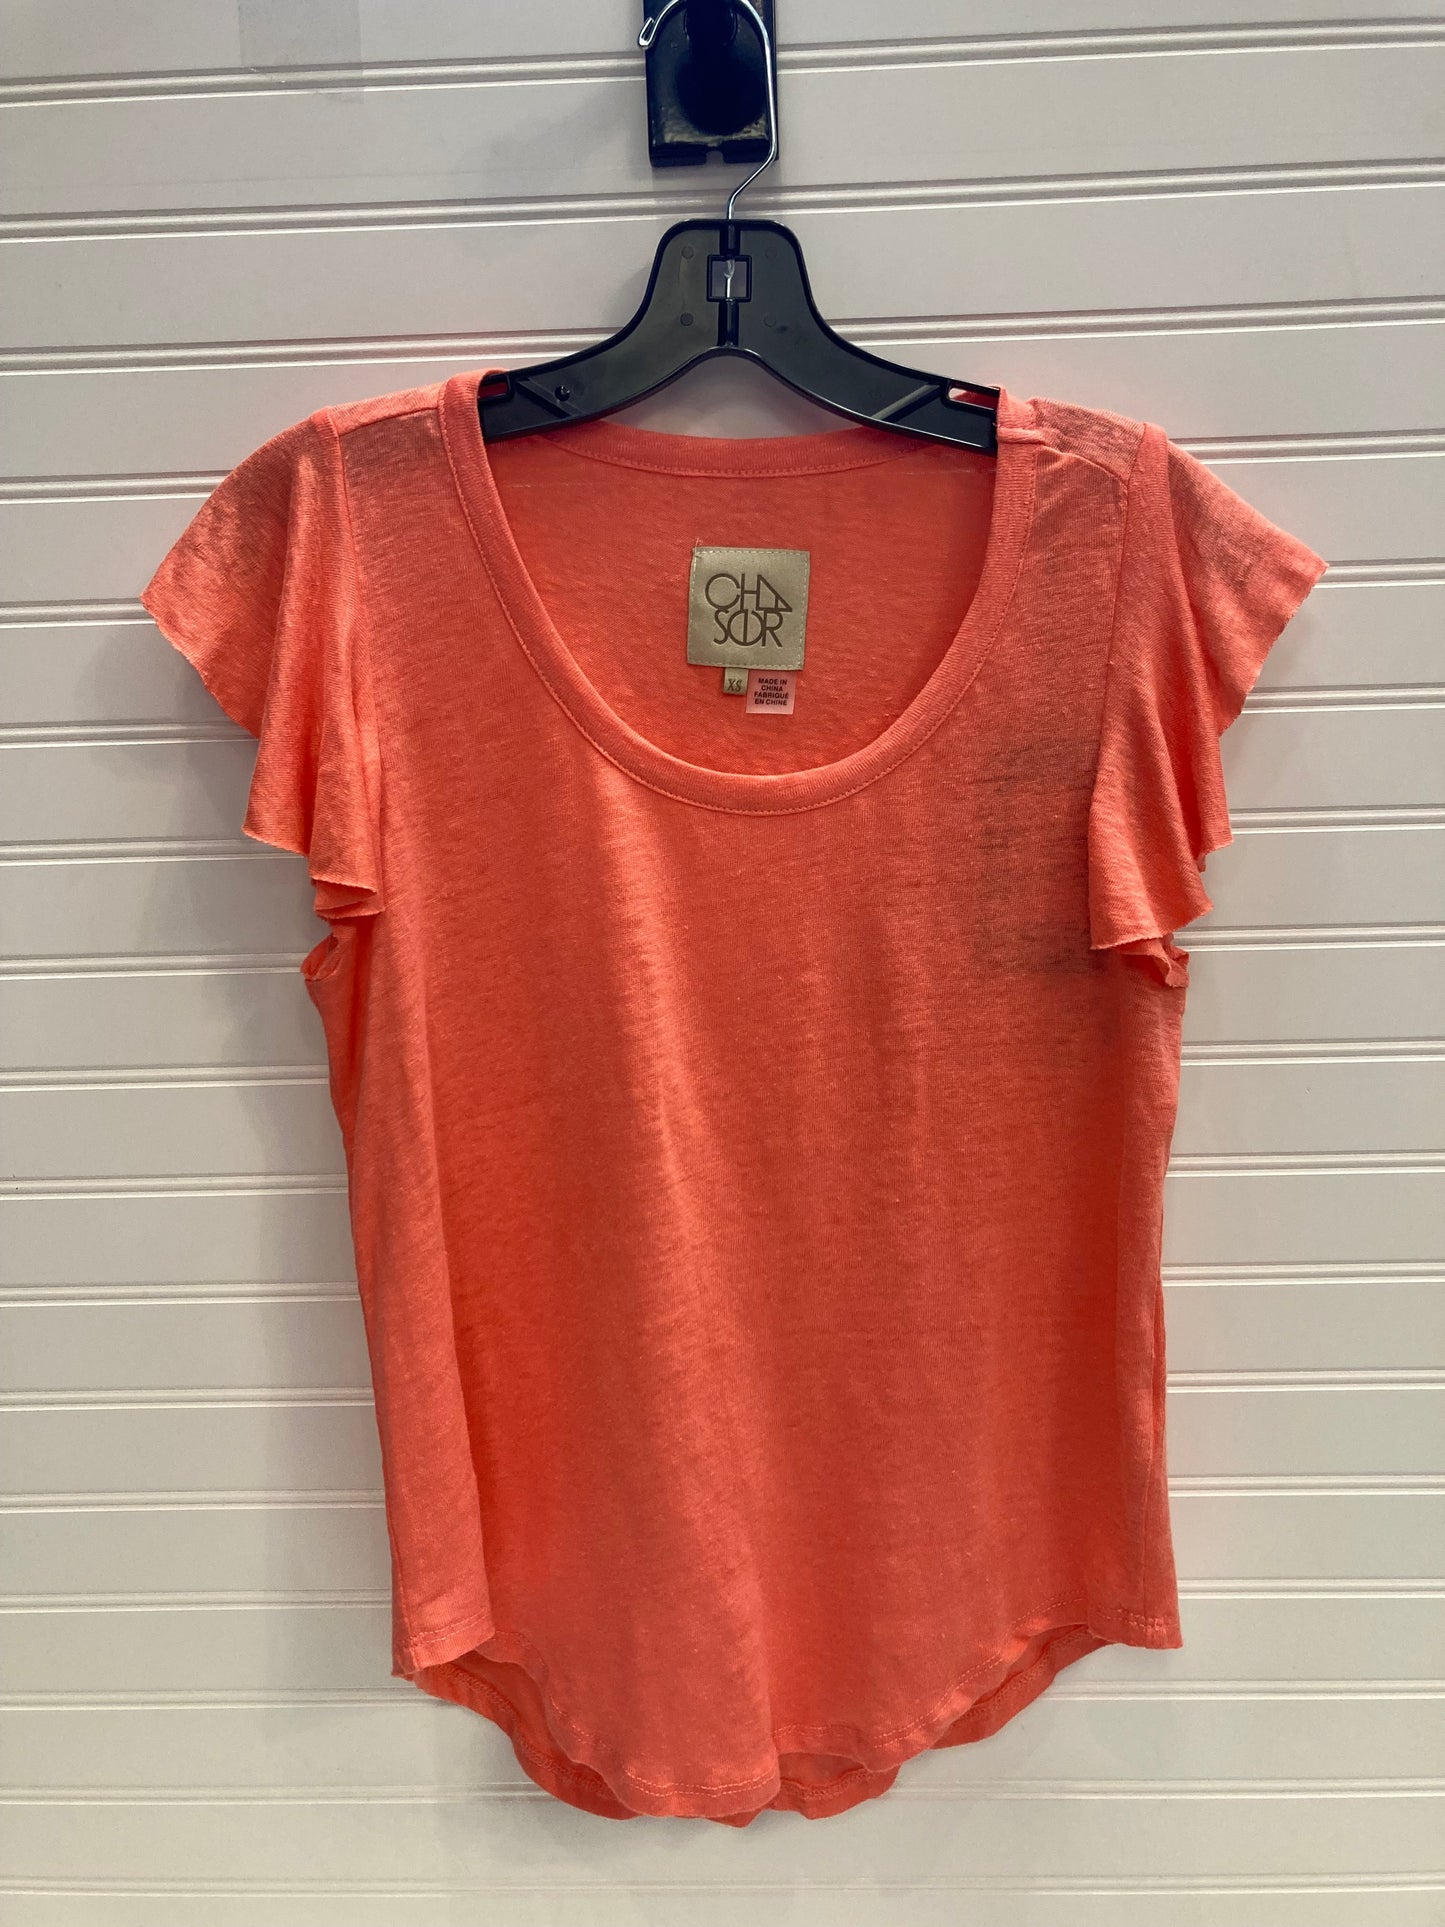 Coral Top Short Sleeve Chaser, Size Xs